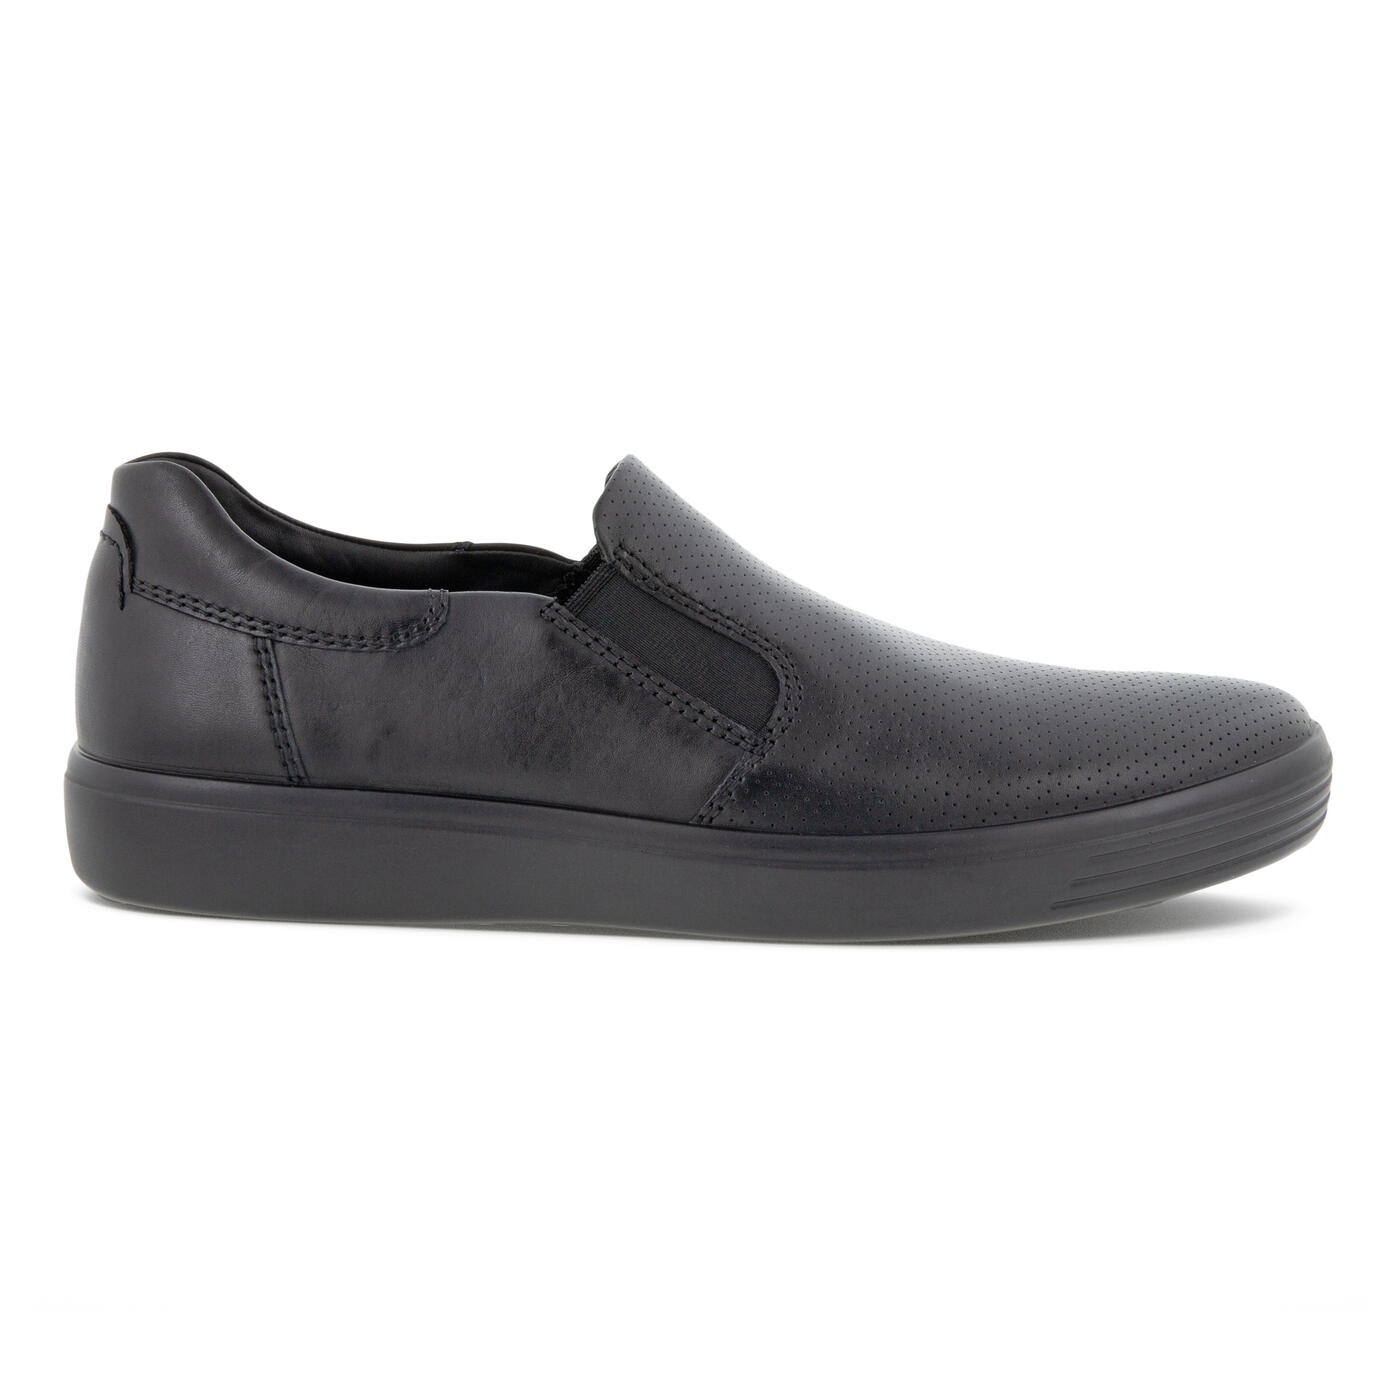 Men's Soft 7 Soft Slip-on Sneakers | ECCO® Shoes